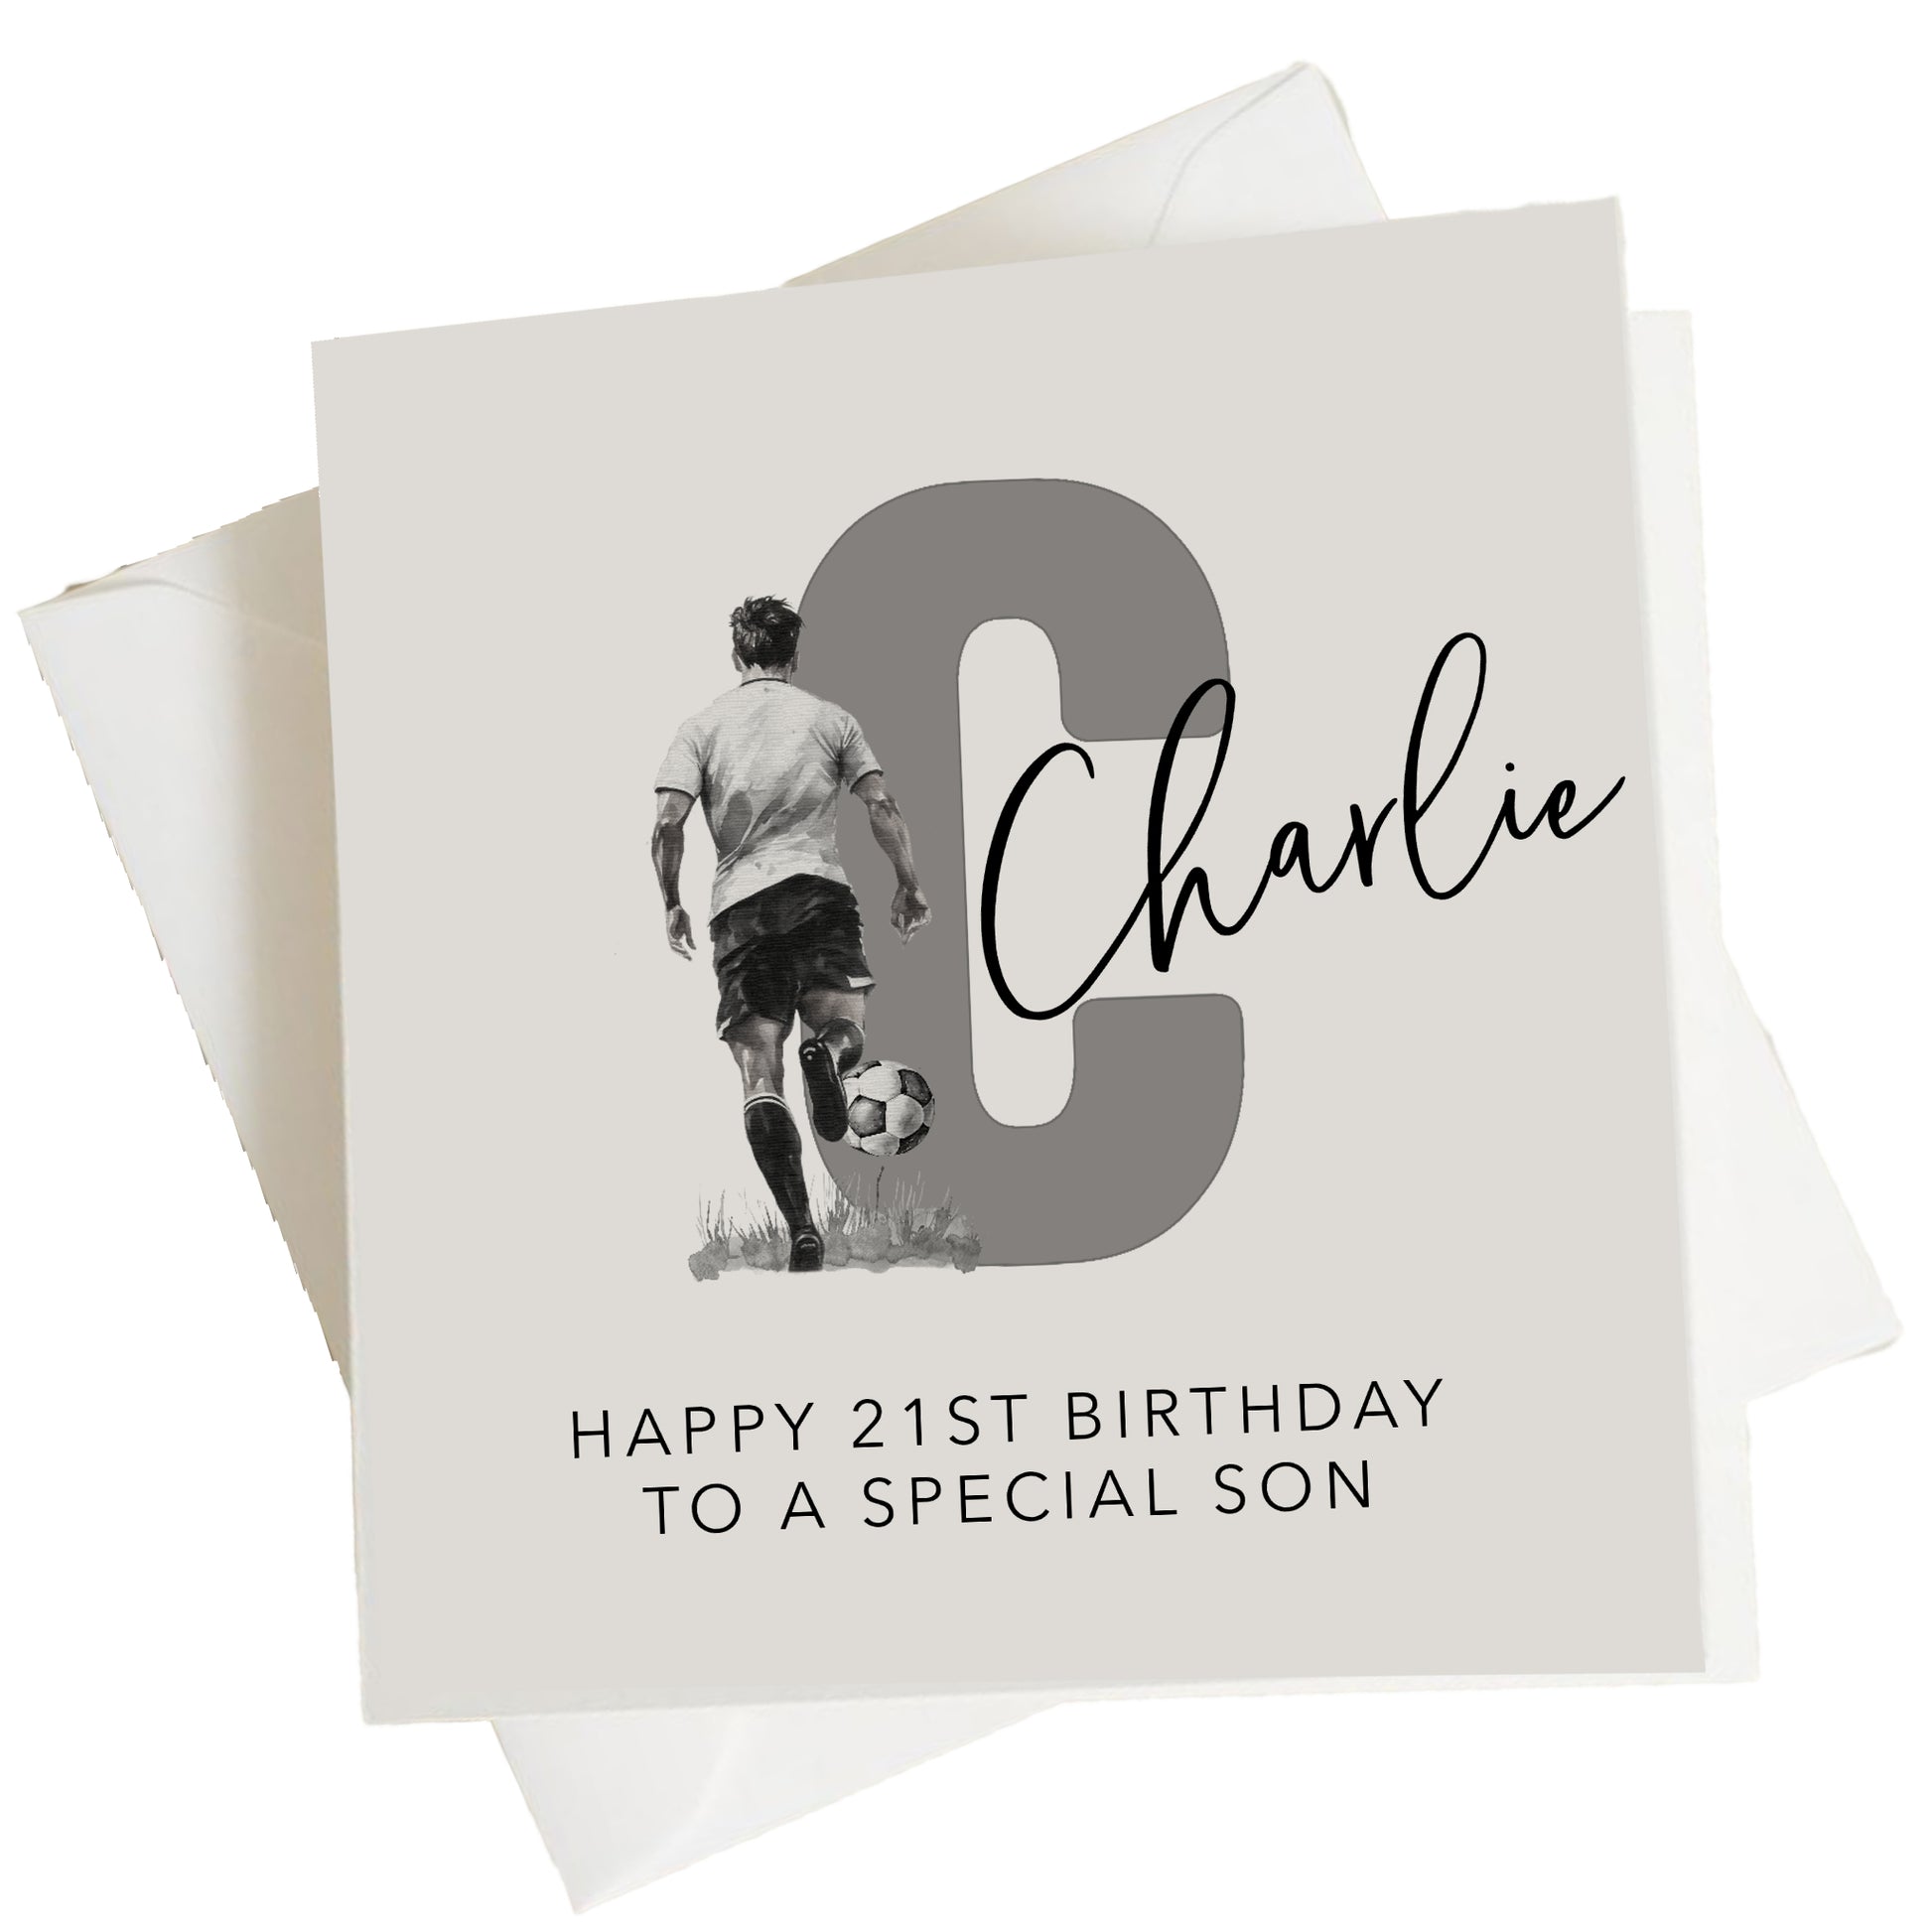 a birthday card with a picture of a man kicking a soccer ball